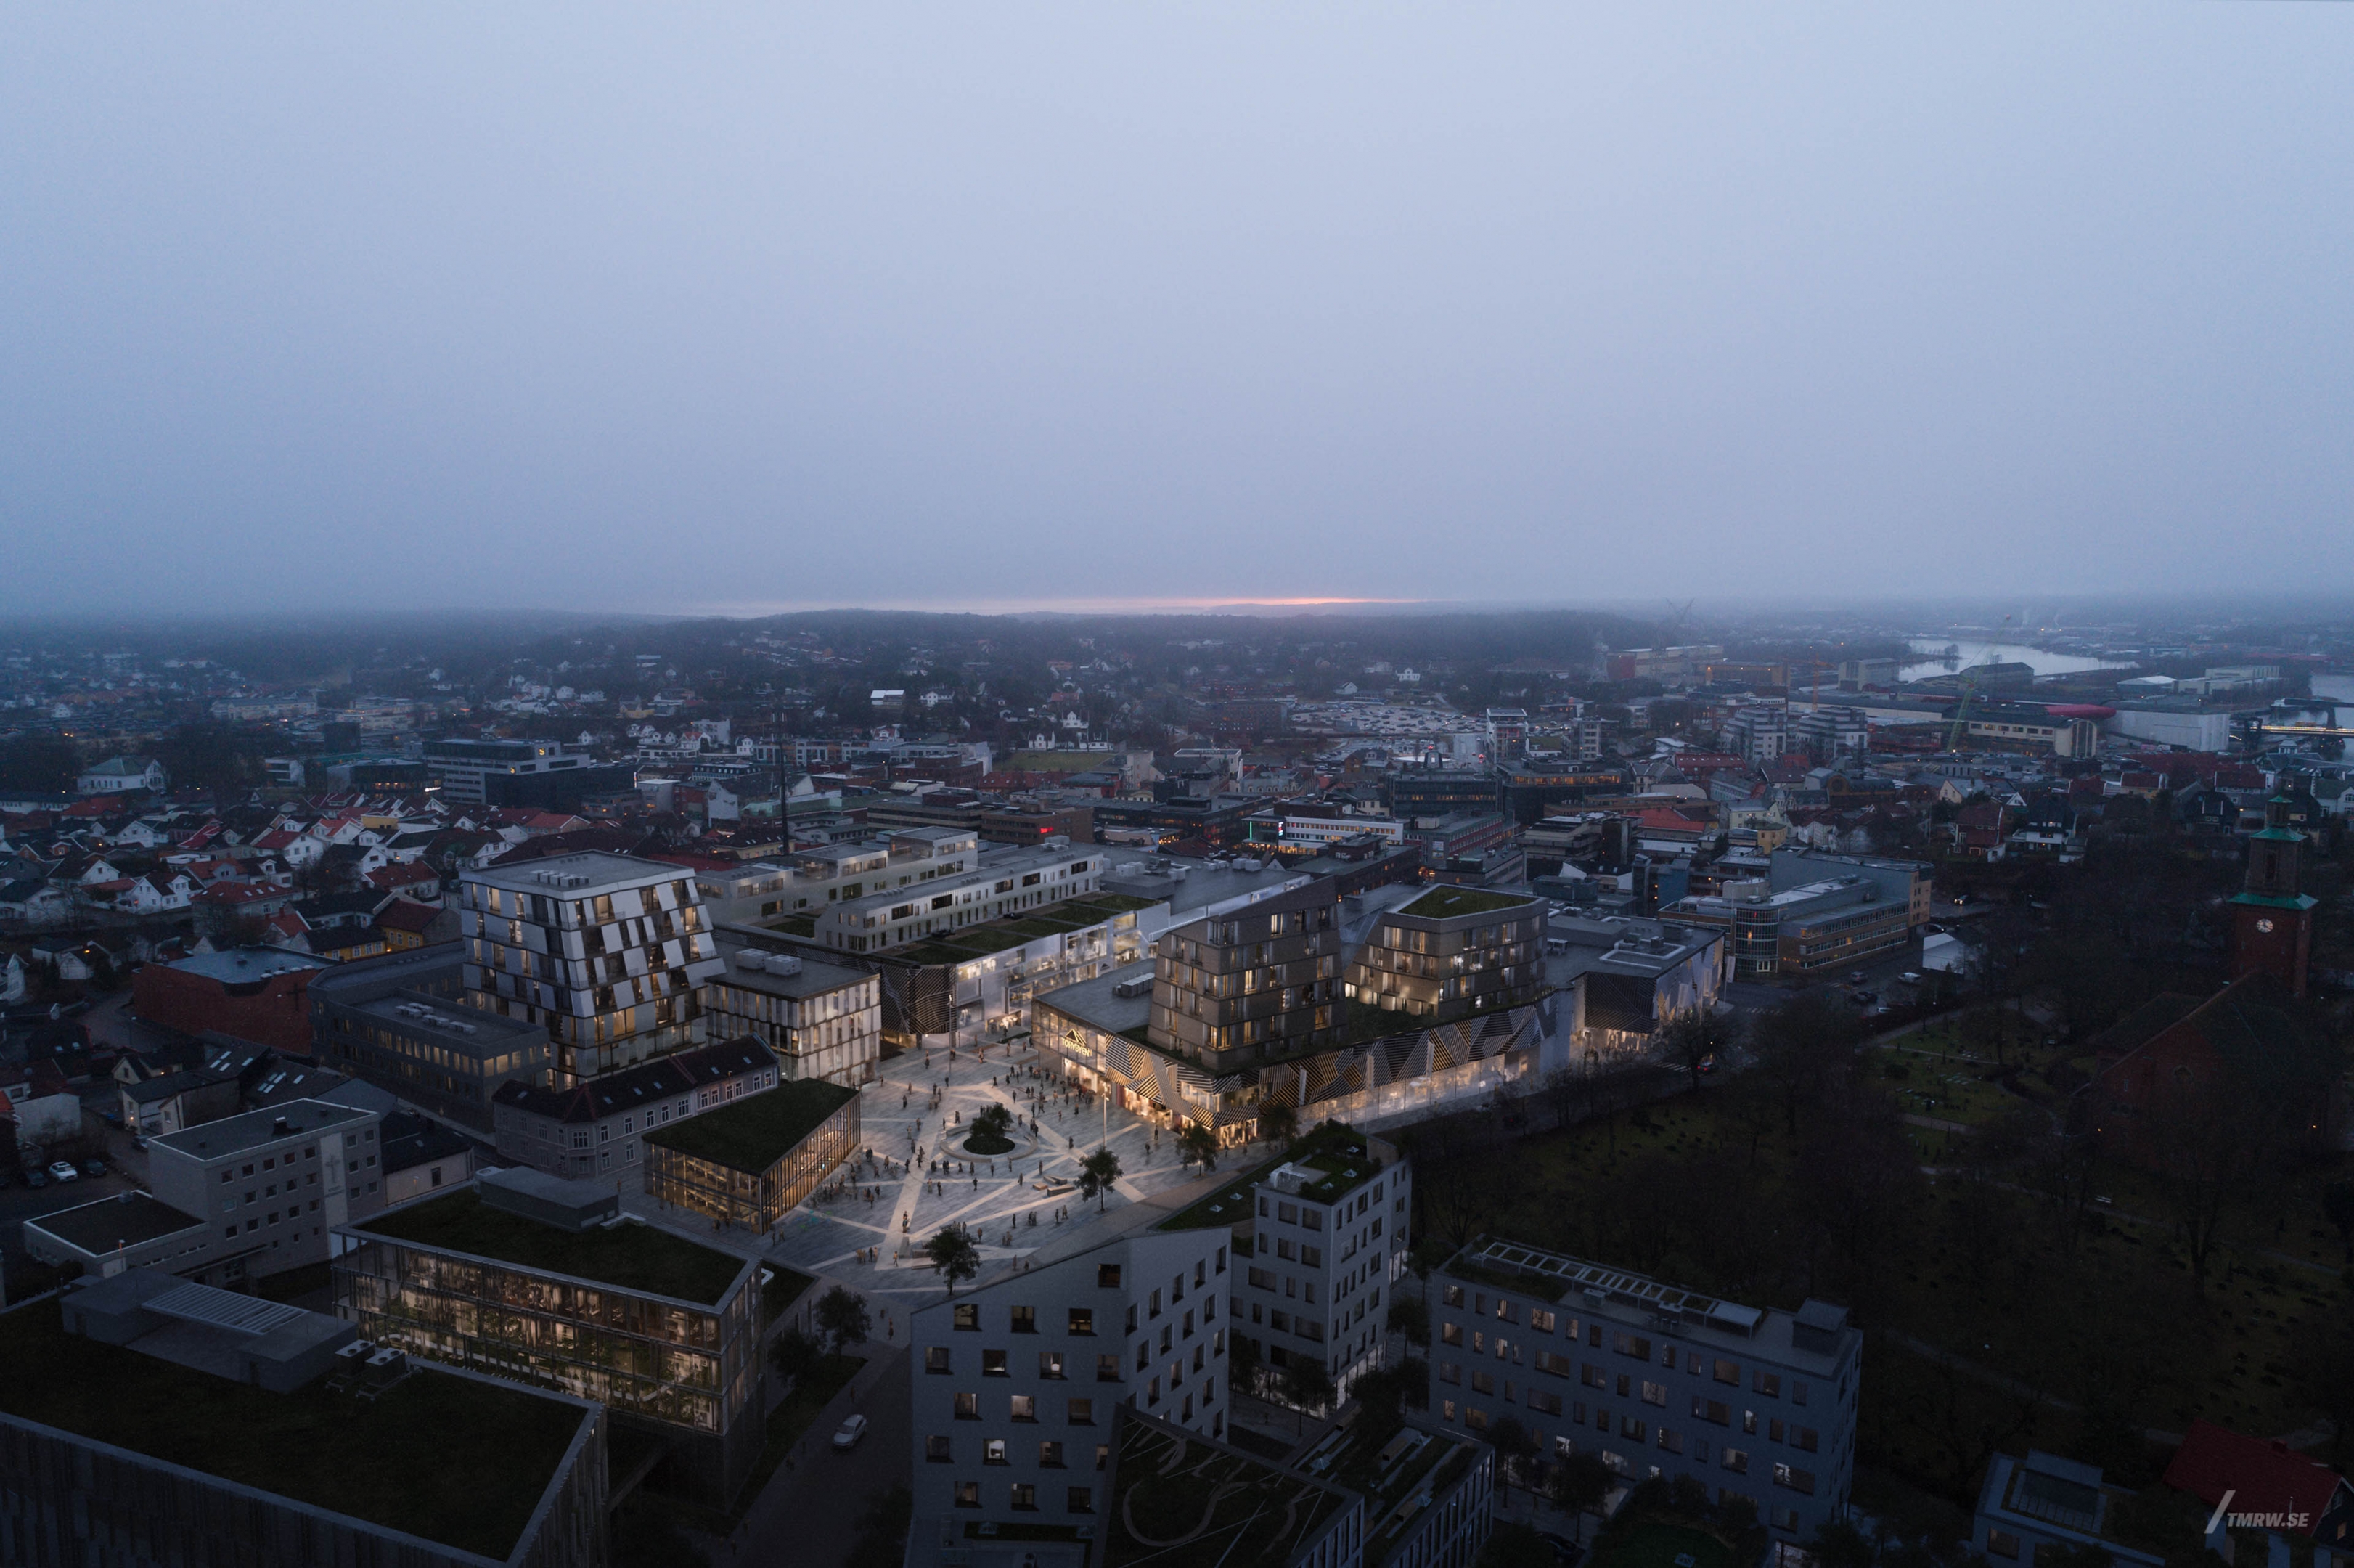 Architectural visualization of Torvbyen for Snöhetta, a masterplan area in dusk light from an aerial level view.